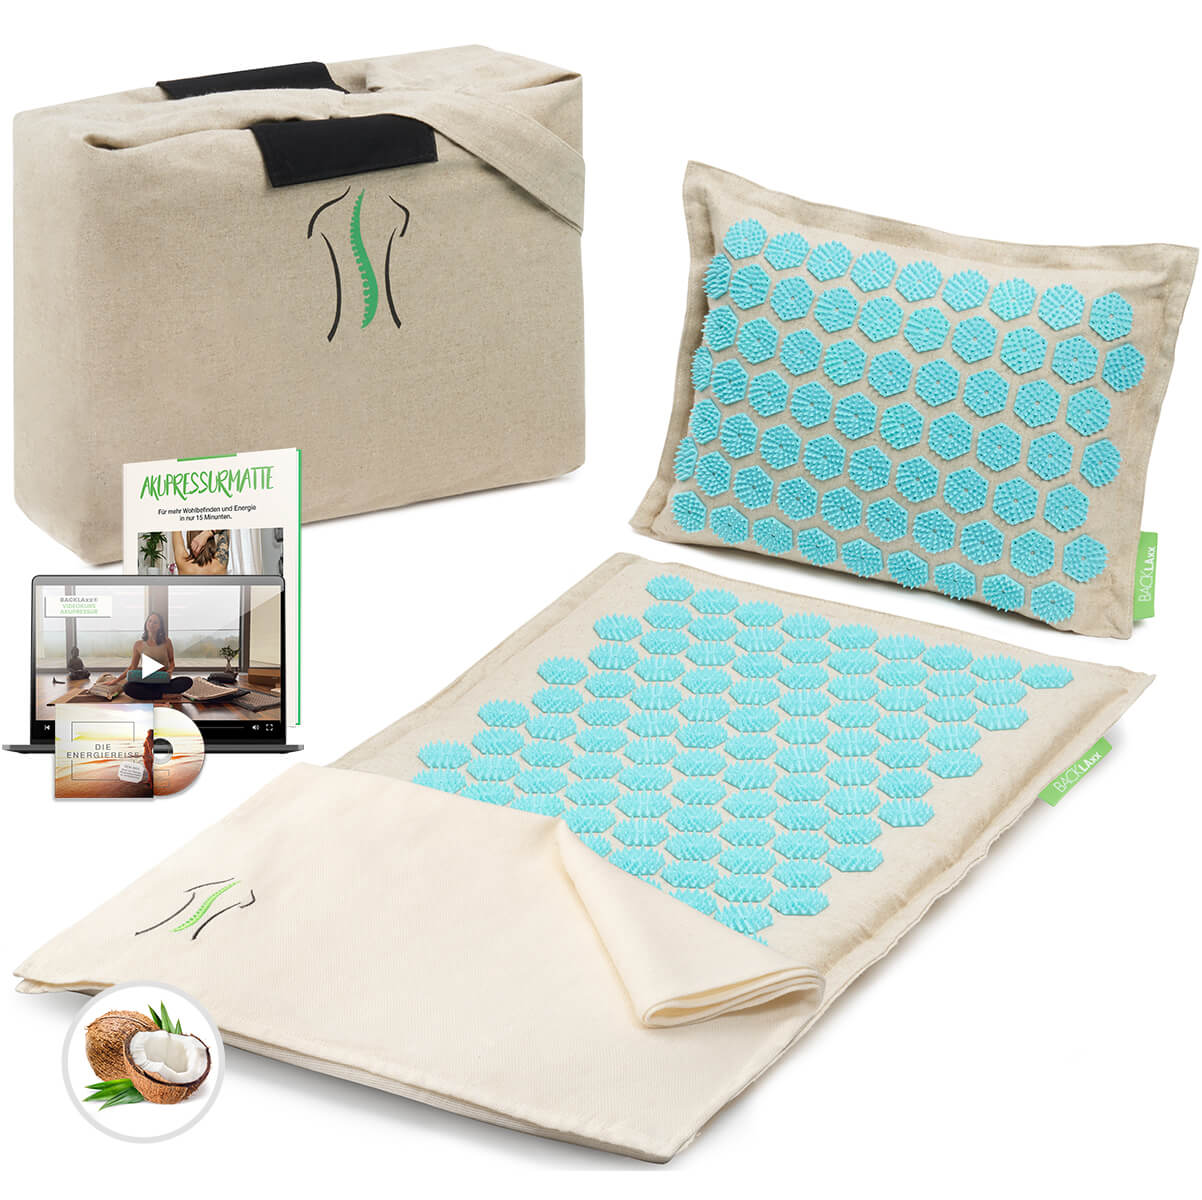 BACKLAxx® Acupressure Mat online for less - BACKLAxx® Shop